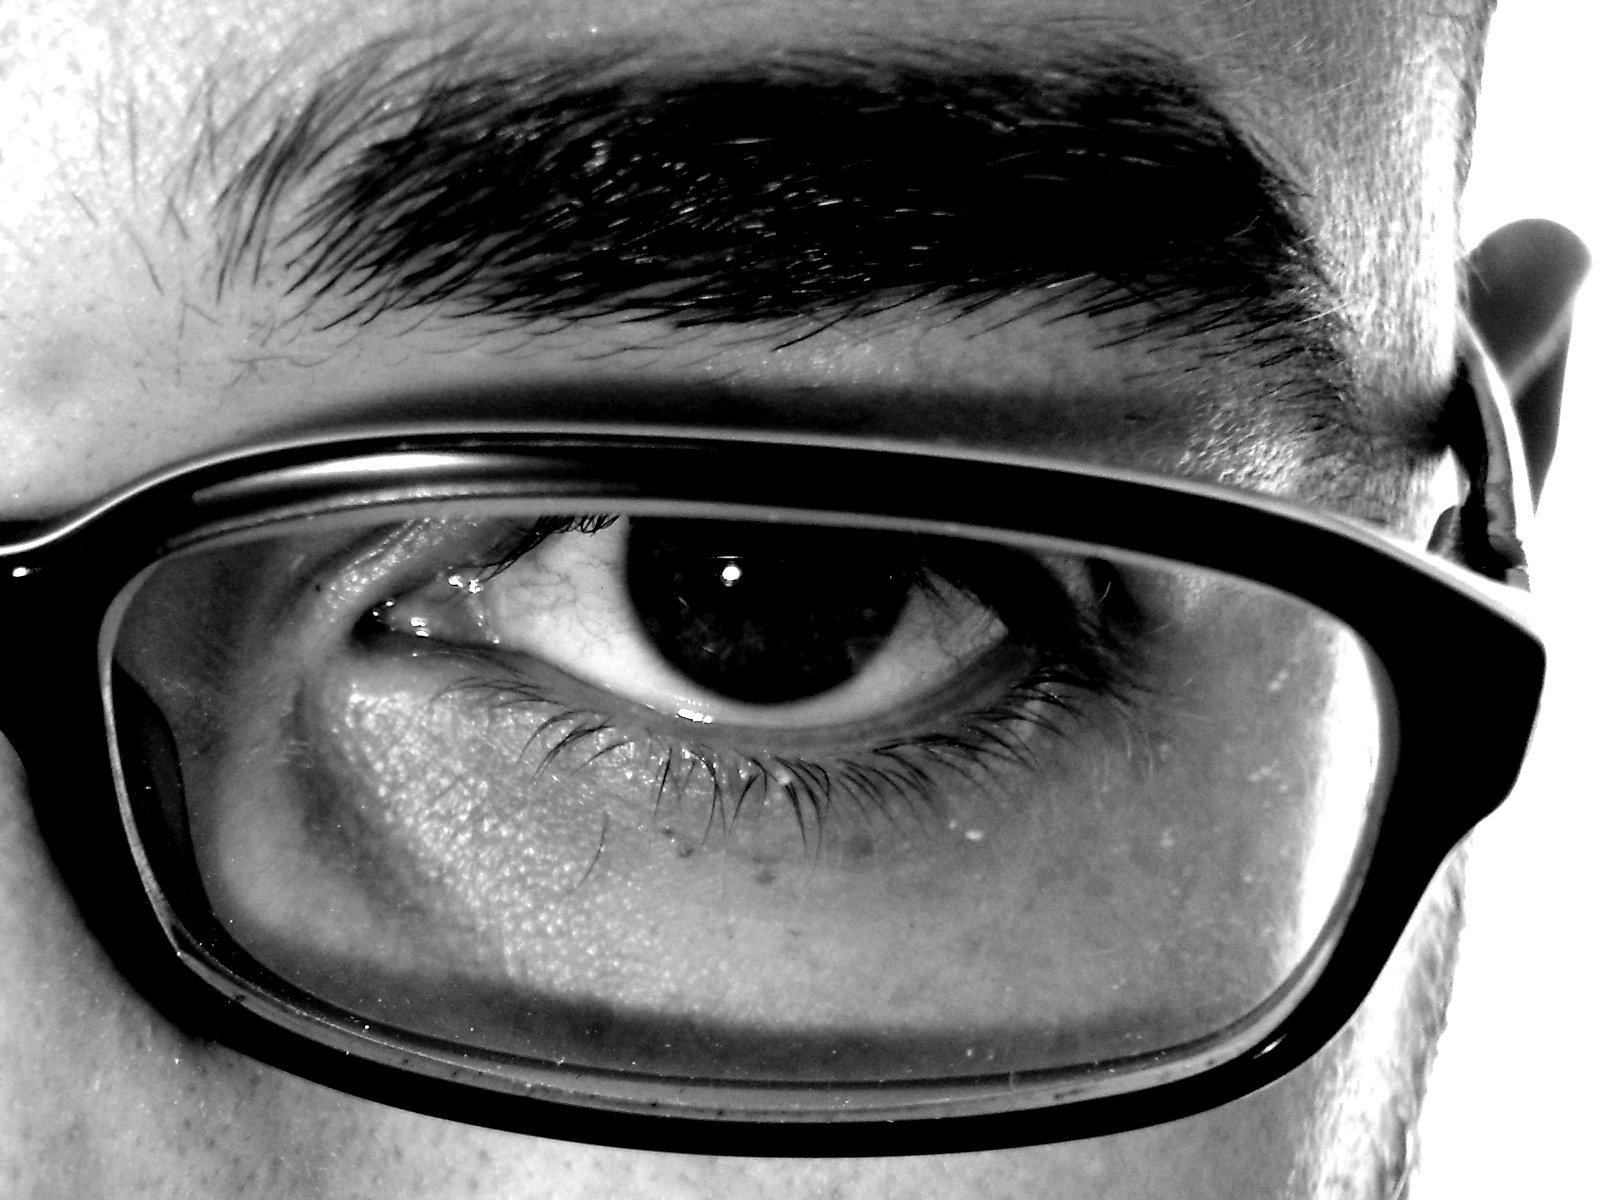 the side of a man's face wearing glasses